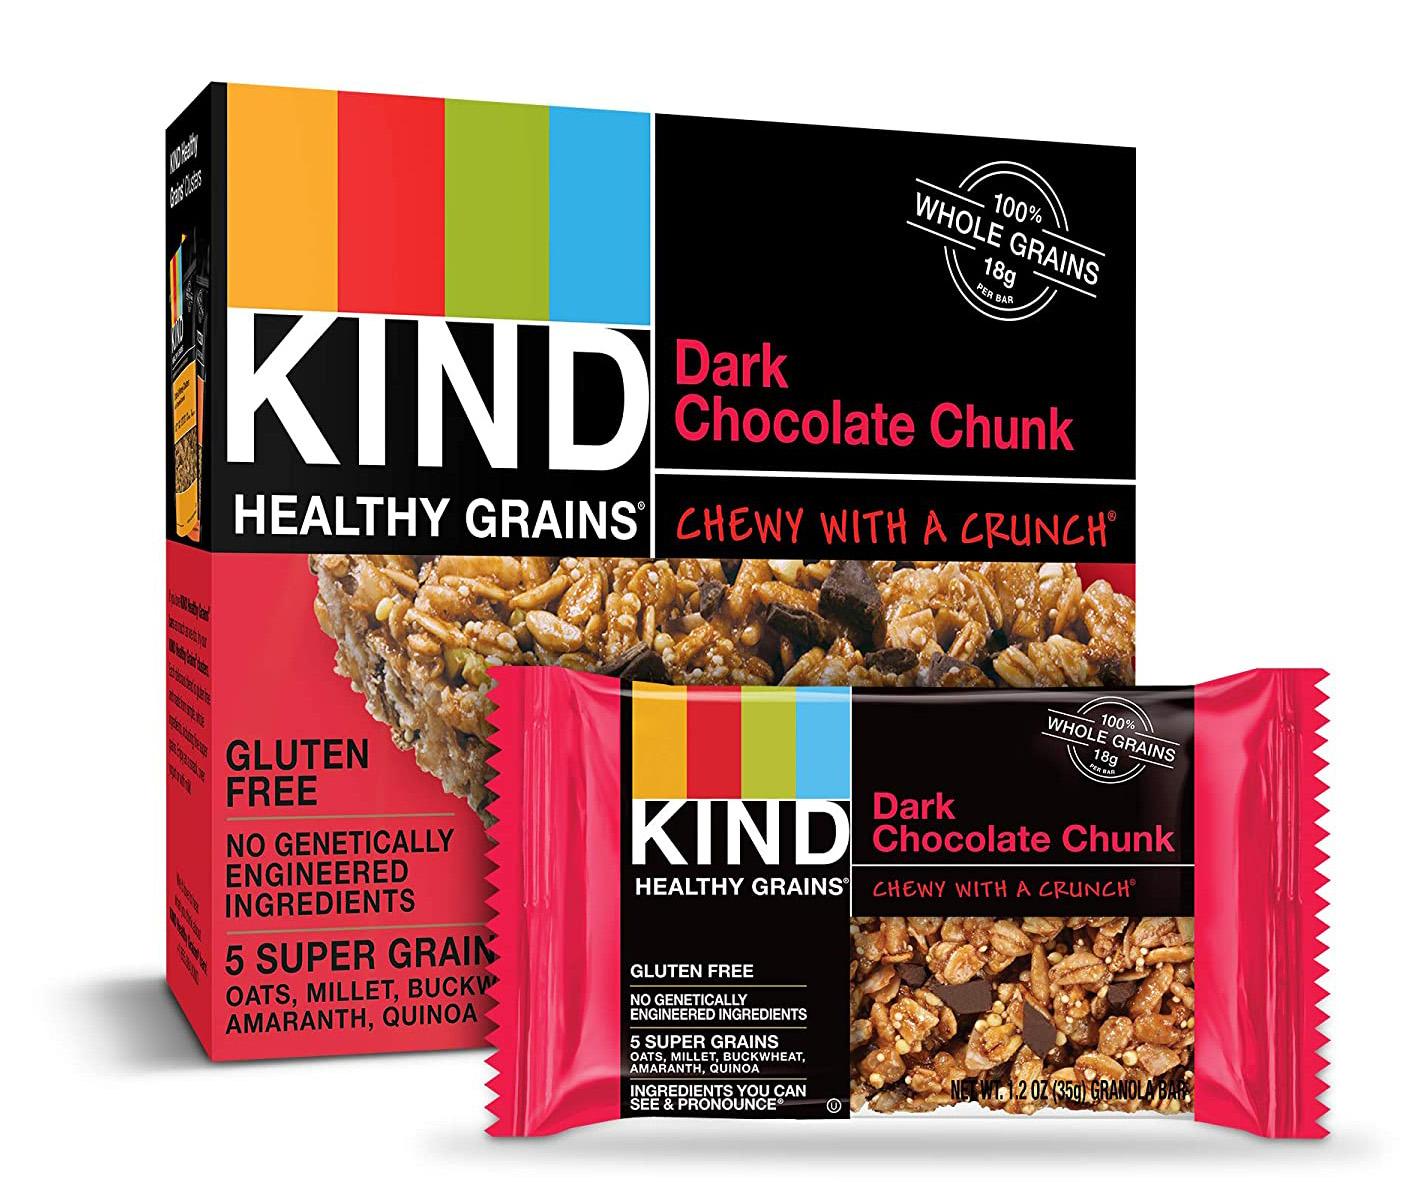 30 Kind Healthy Grains Bars in Dark Chocolate Chunk for $11.86 Shipped